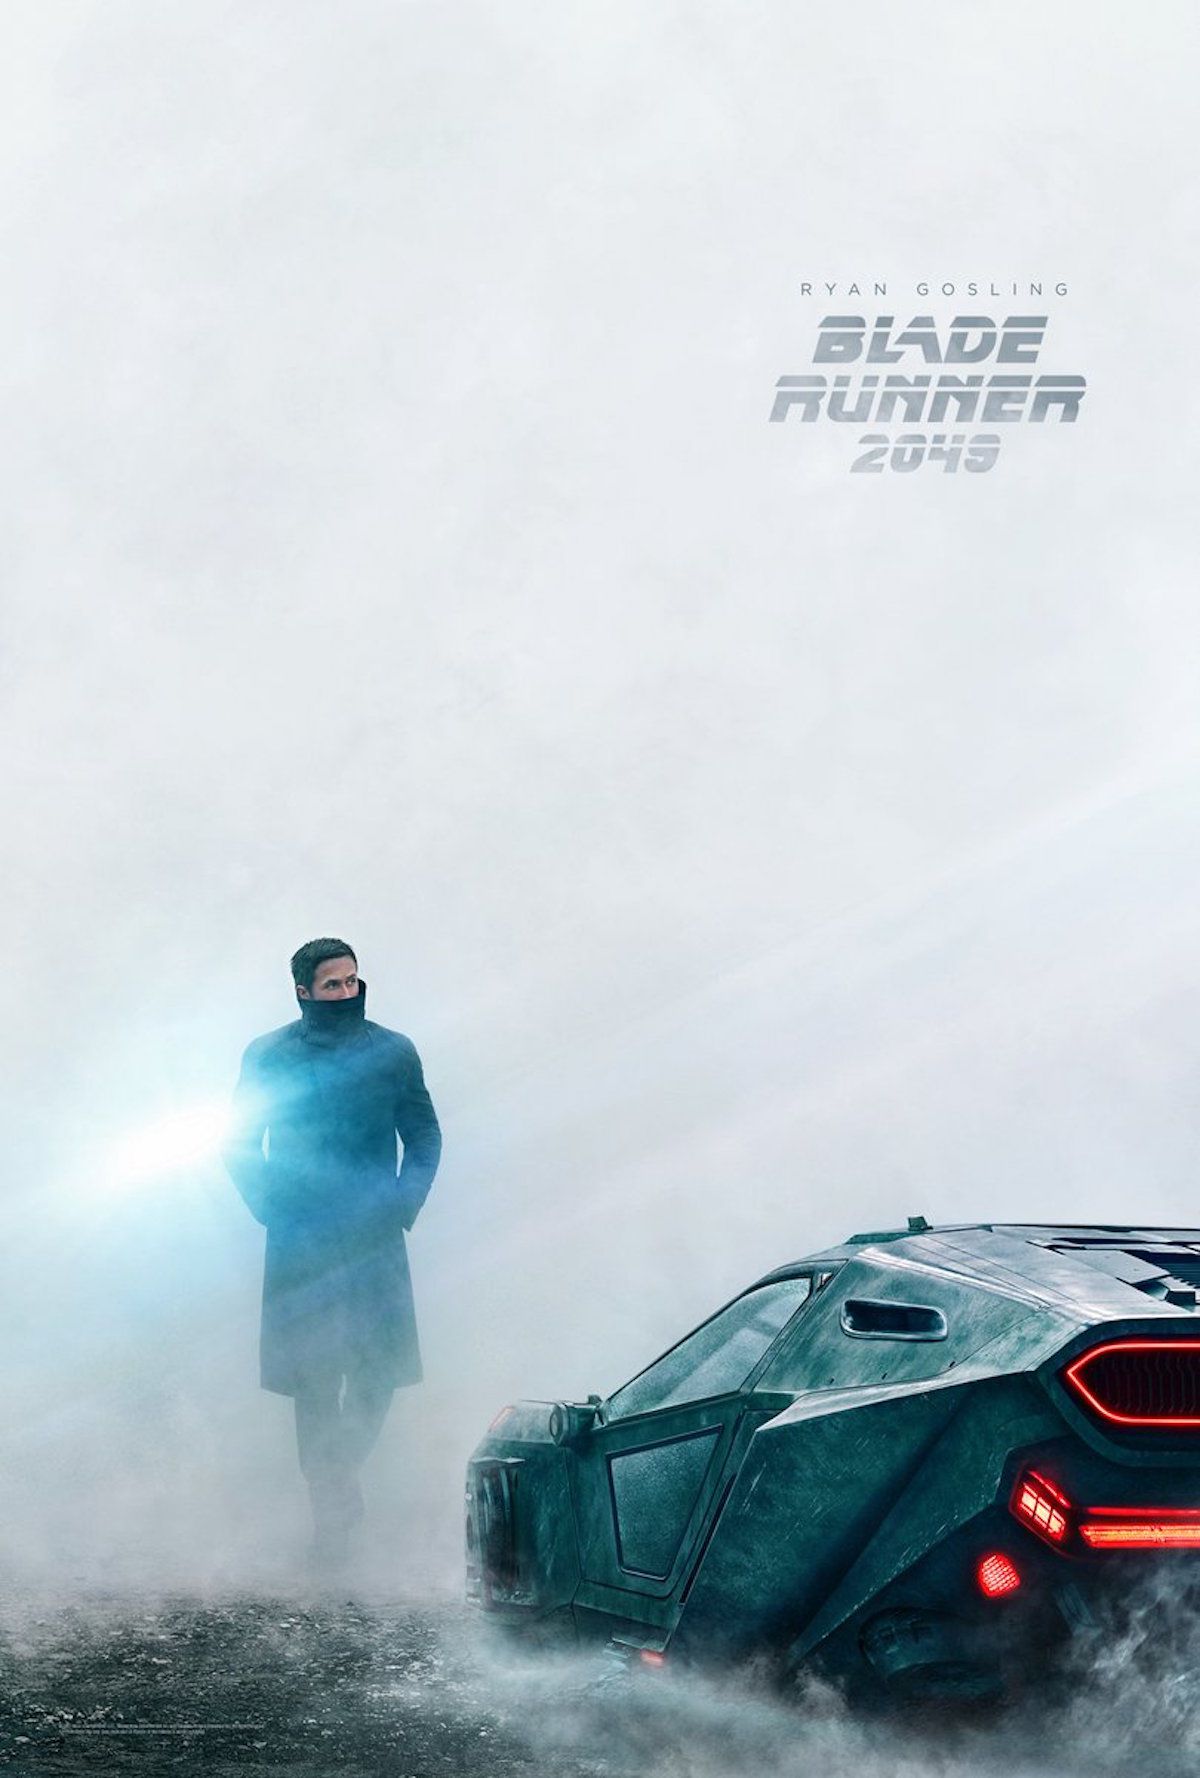 blade runner 2049 poster gosling Here are two new swanky posters for Blade Runner 2049